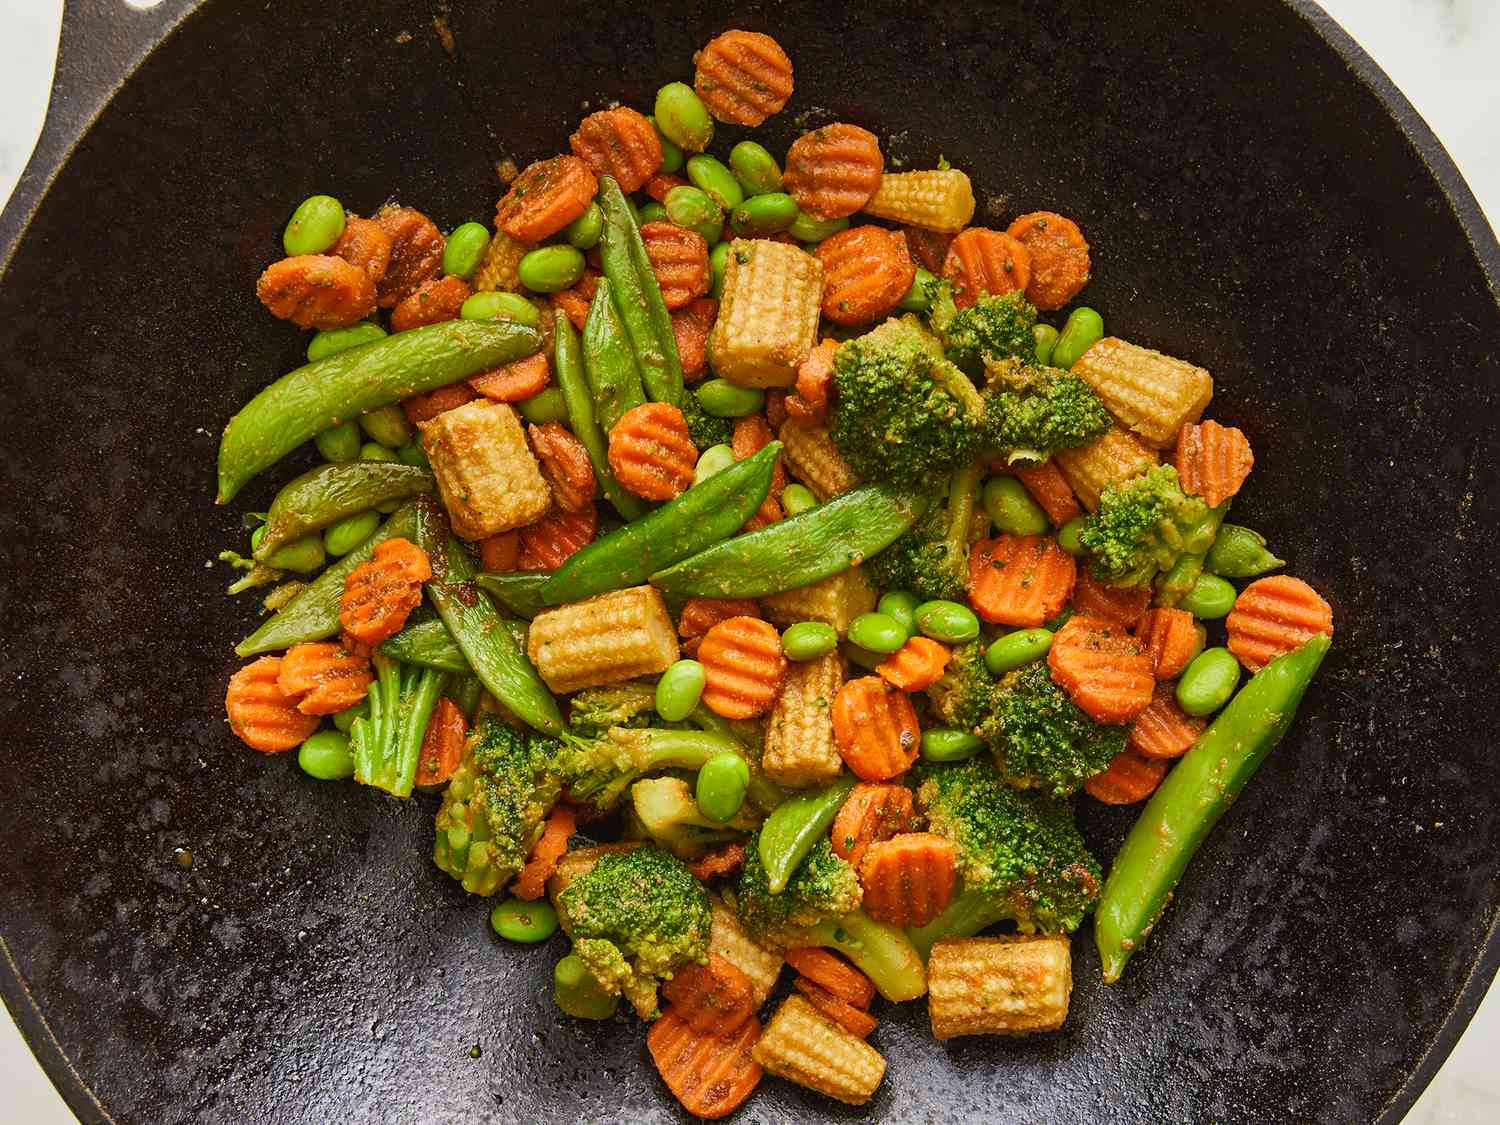 What To Do With Frozen Mixed Vegetables